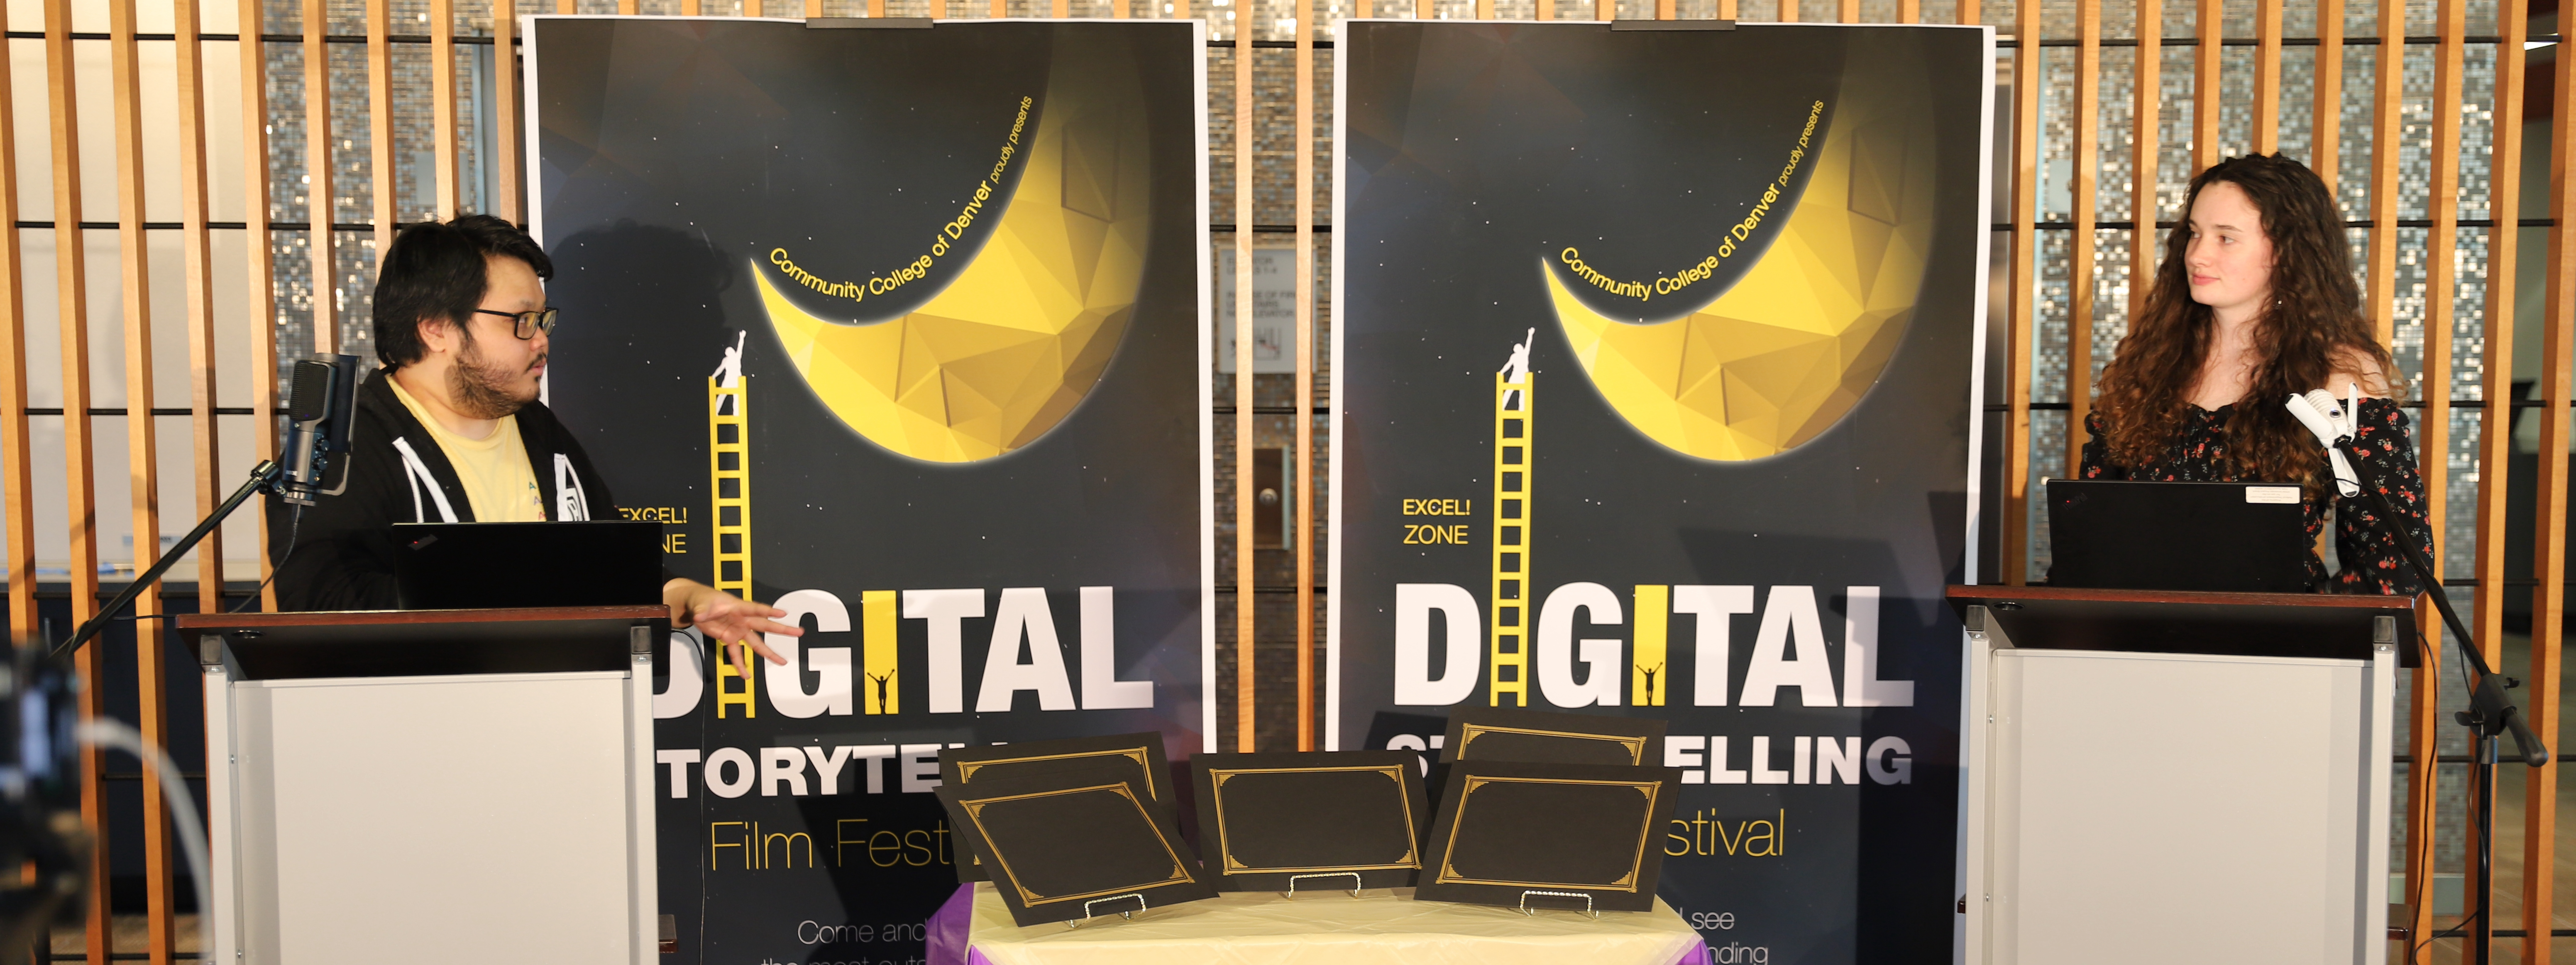 Two speakers at two podiums illuminated by hot lights with signs behind them reading "Digital Storytelling Film Festival"